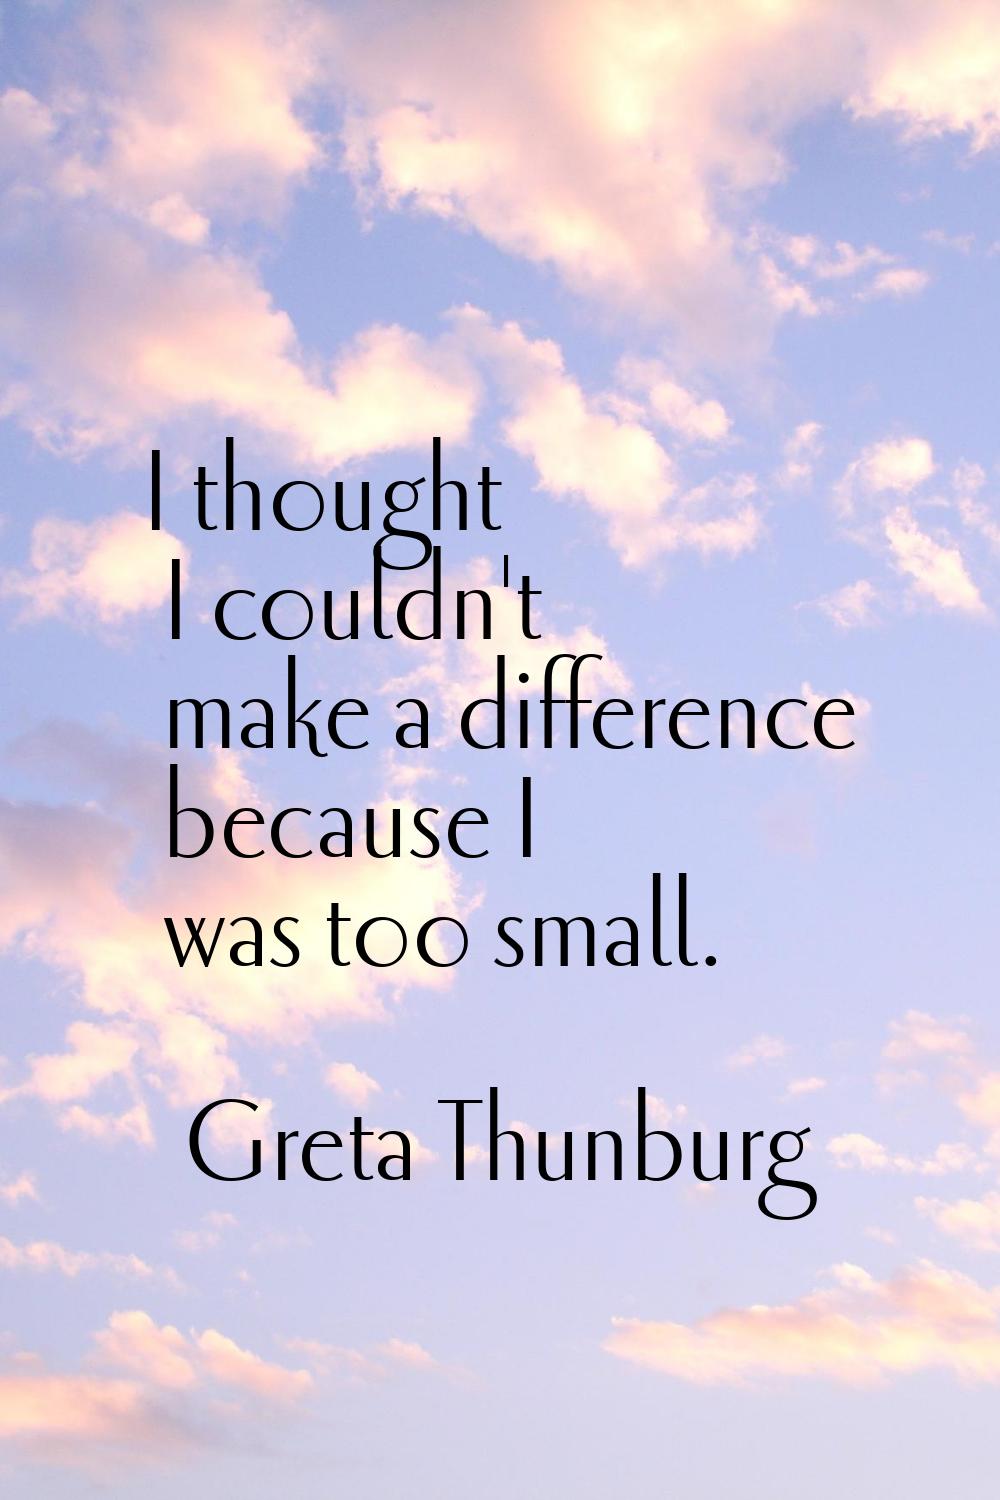 I thought I couldn't make a difference because I was too small.